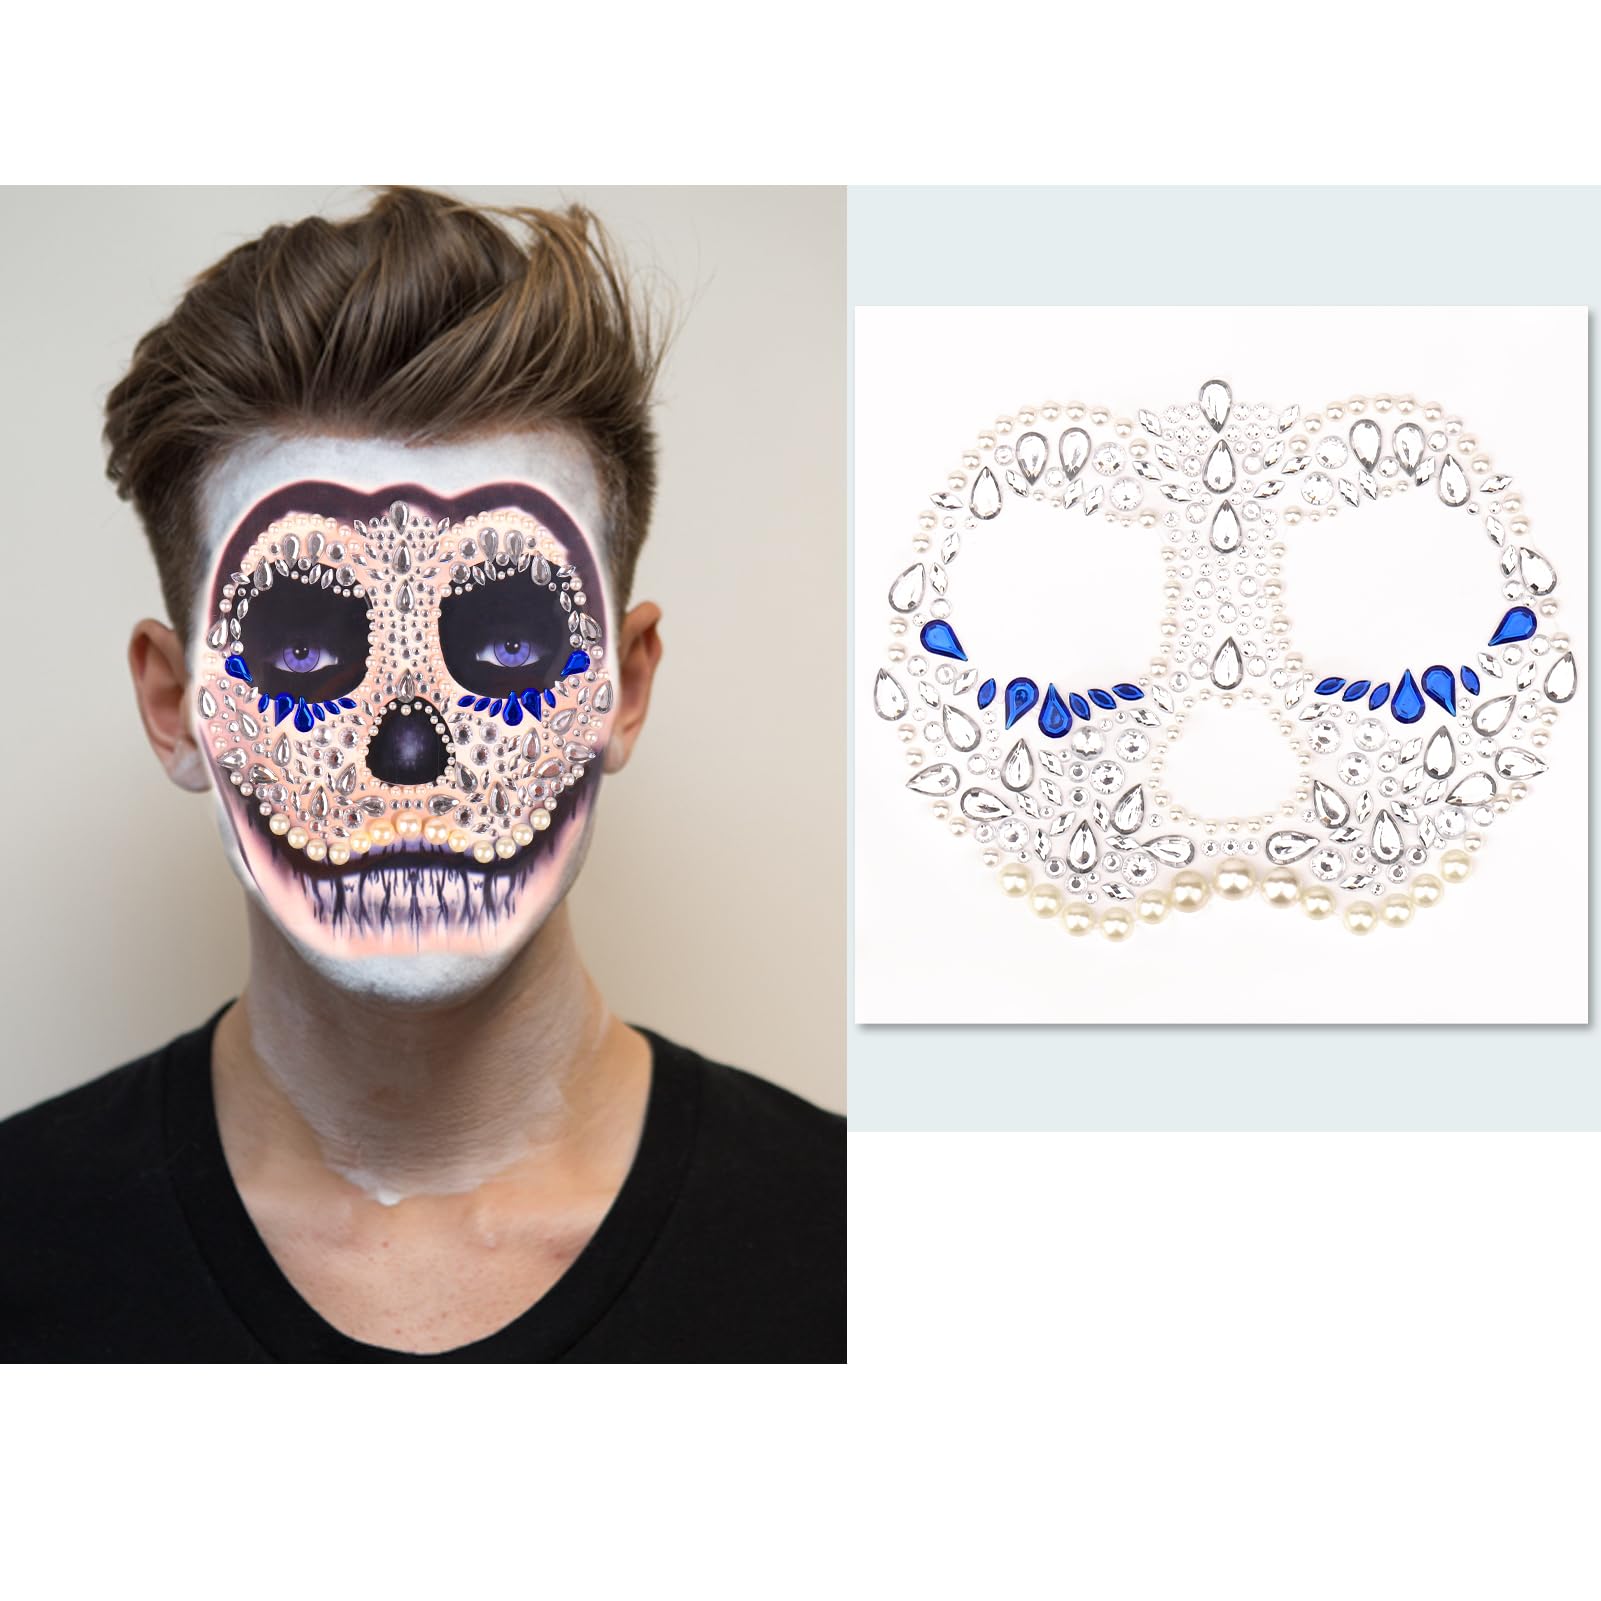 Vodolo Halloween Face Jewels Stickers,Hallowen Face Gems Decorations,Day of The Dead Skull Temporary Face Tattoos,Face Makeup Rhinestone Stick on for Adults and Kids